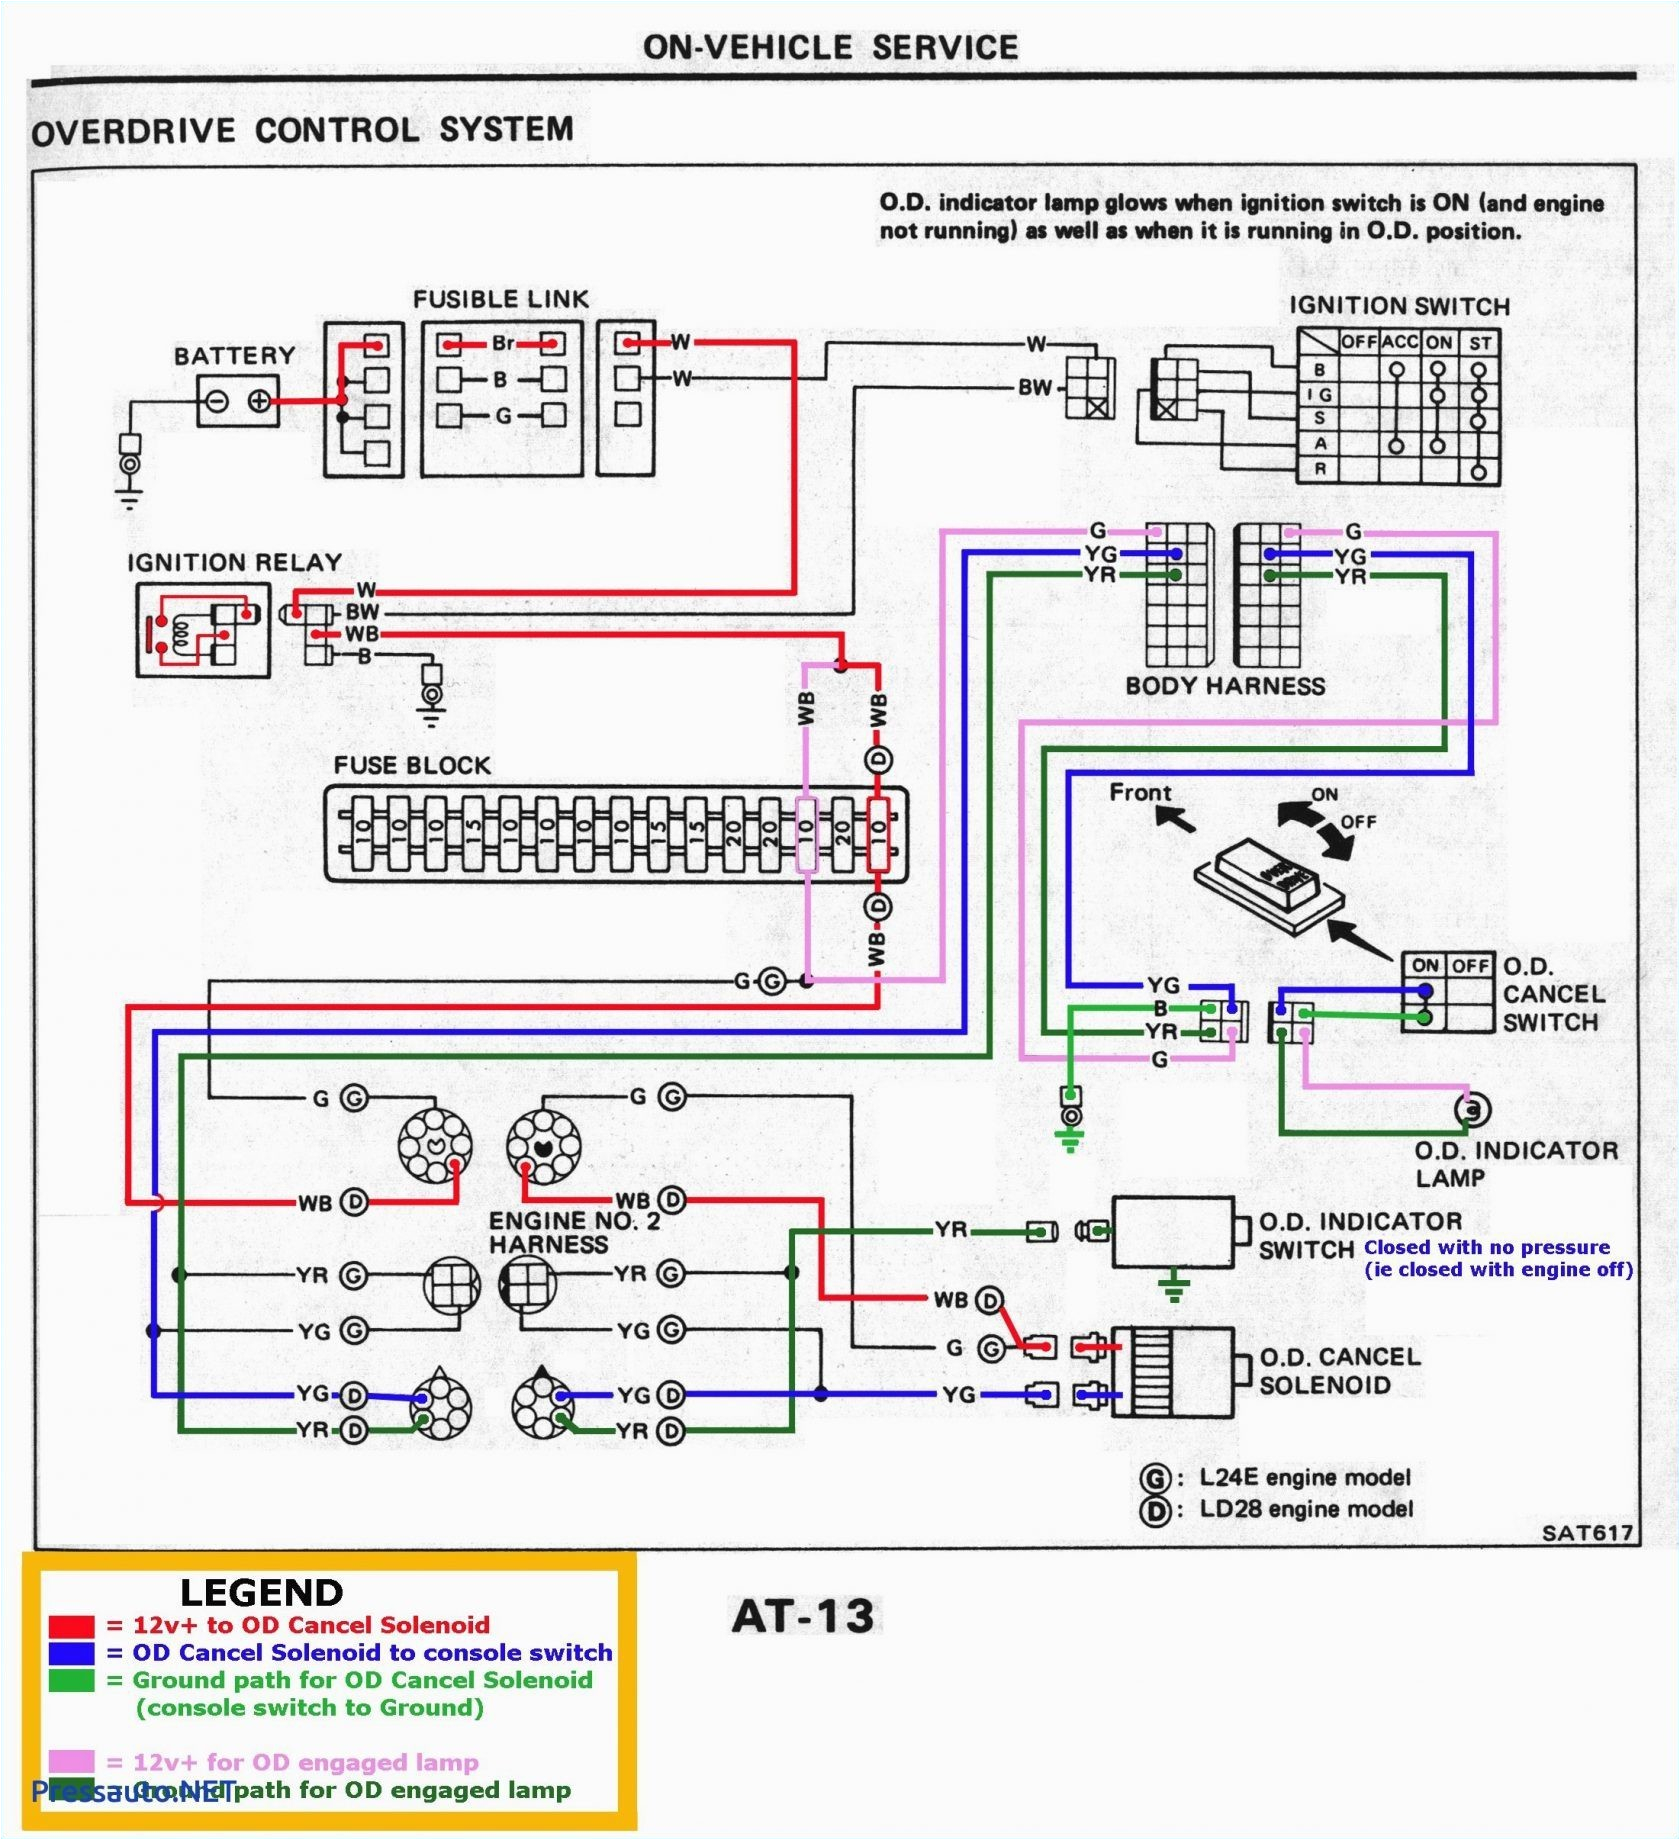 free download wiring diagram rg related keywords suggestions